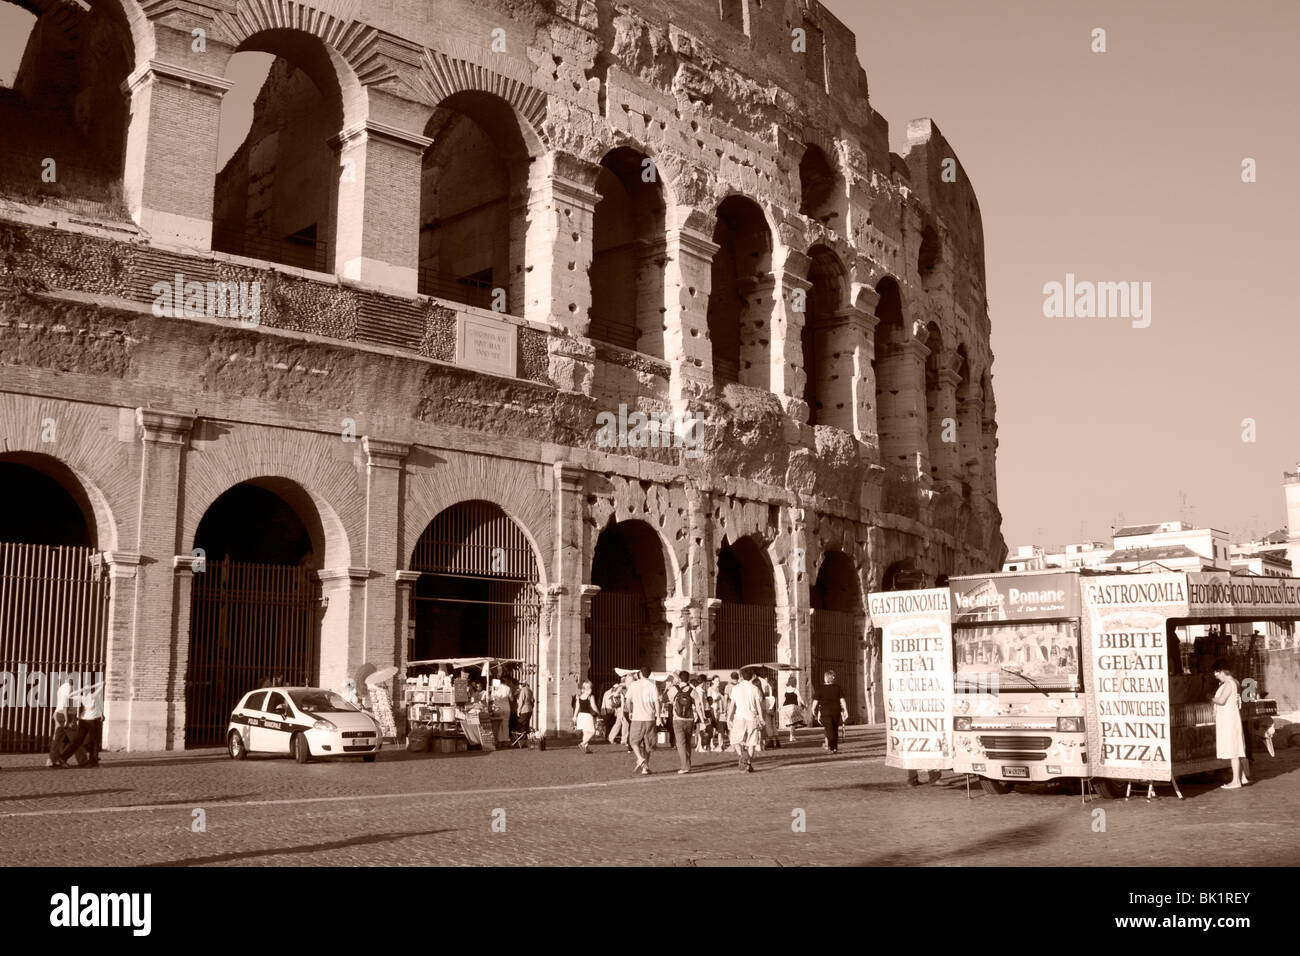 Colosseum, Rome. Italy. Food vendor in front of the colosseum Stock Photo